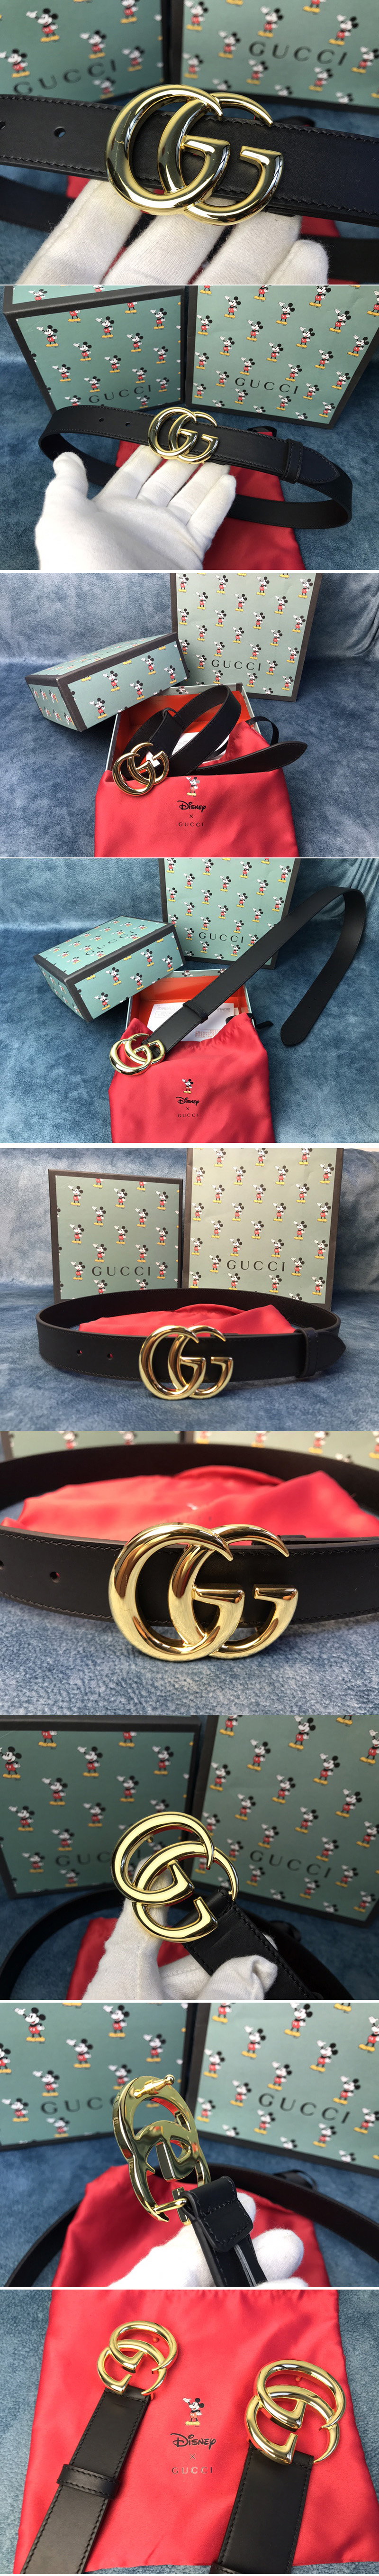 Replica Gucci 414516 GG Marmont leather 30mm belt with shiny buckle in Black leather